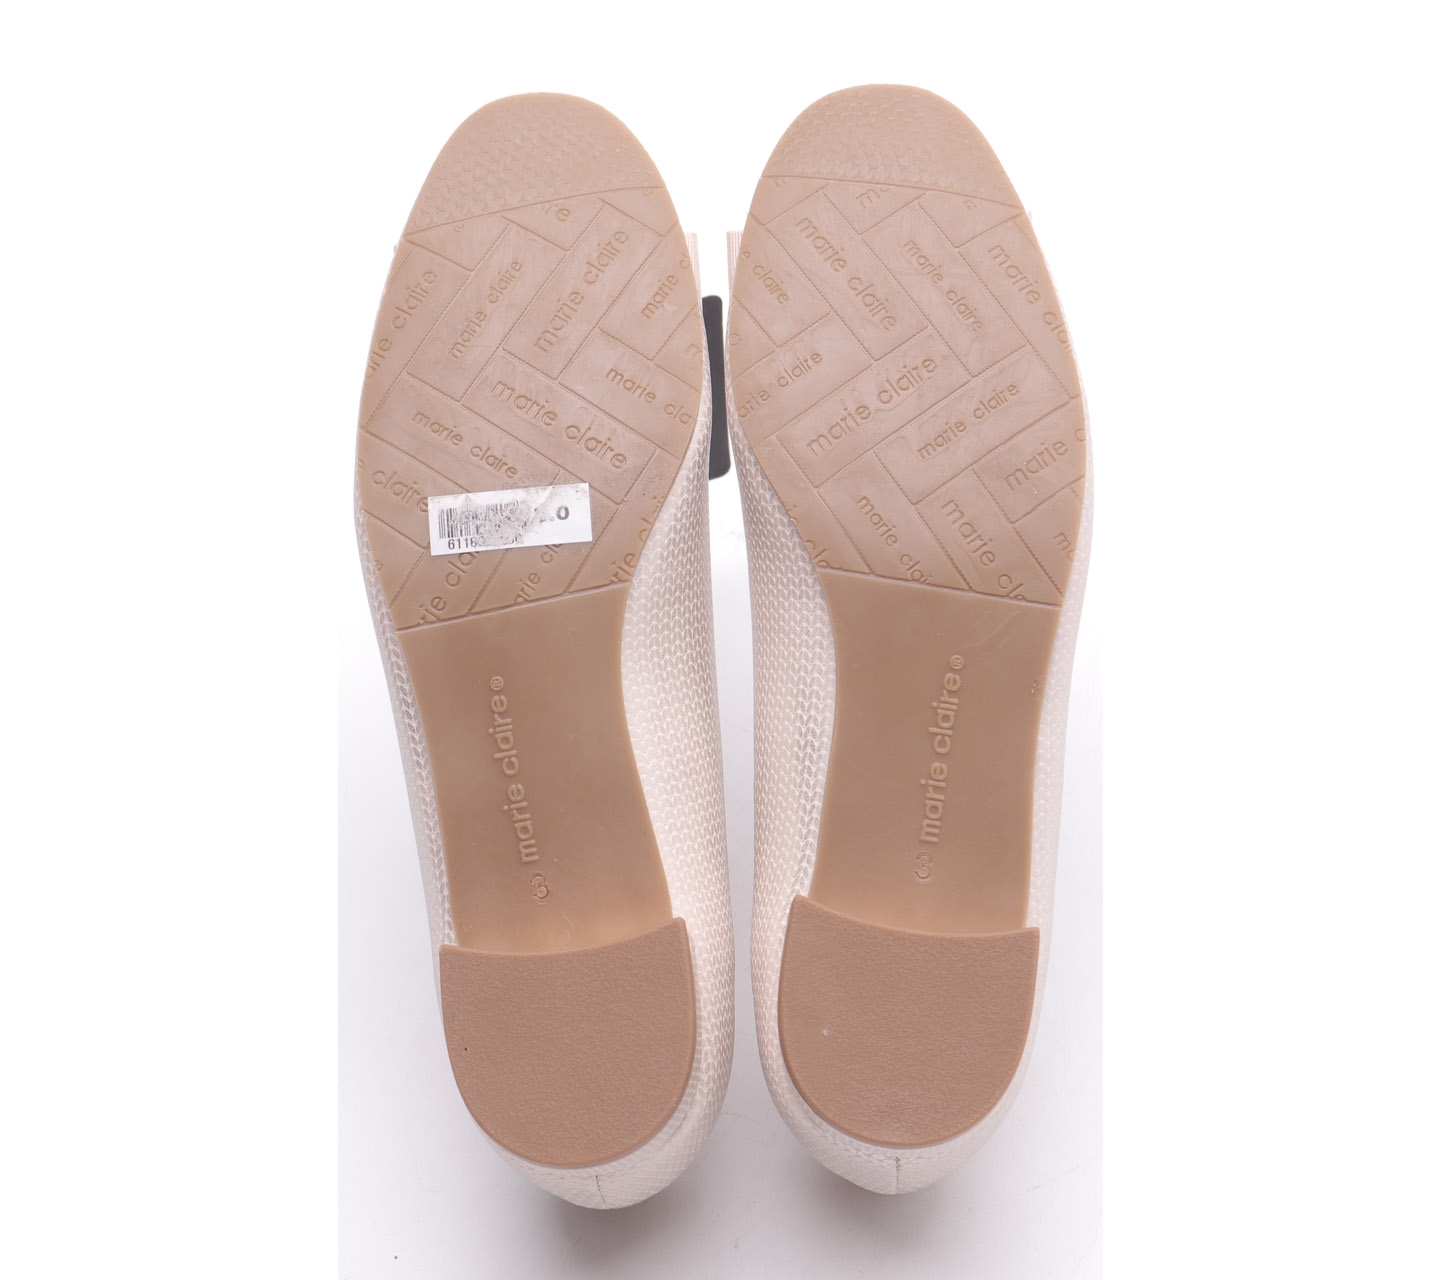 Marie Claire Cream Flat Shoes